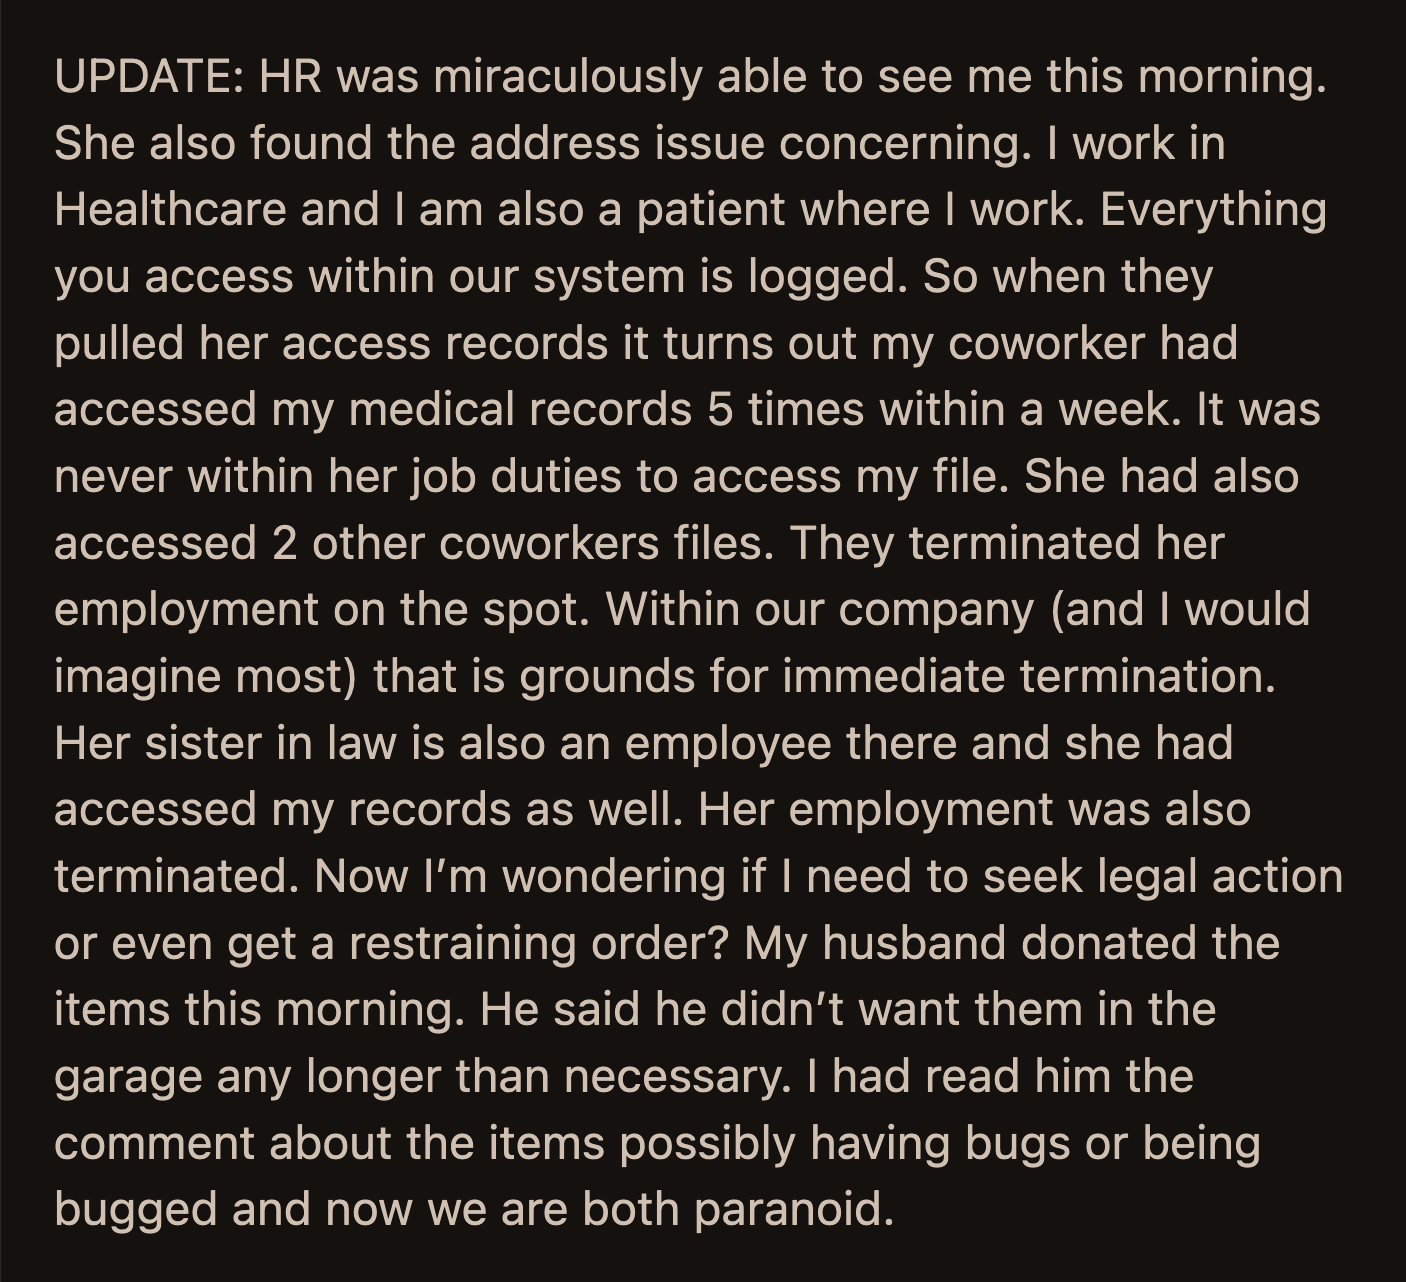 They work in healthcare. Her coworker and her sis-in-law accessed OP's medical records. They found her address through those. The coworker and her SIL were terminated on the spot.